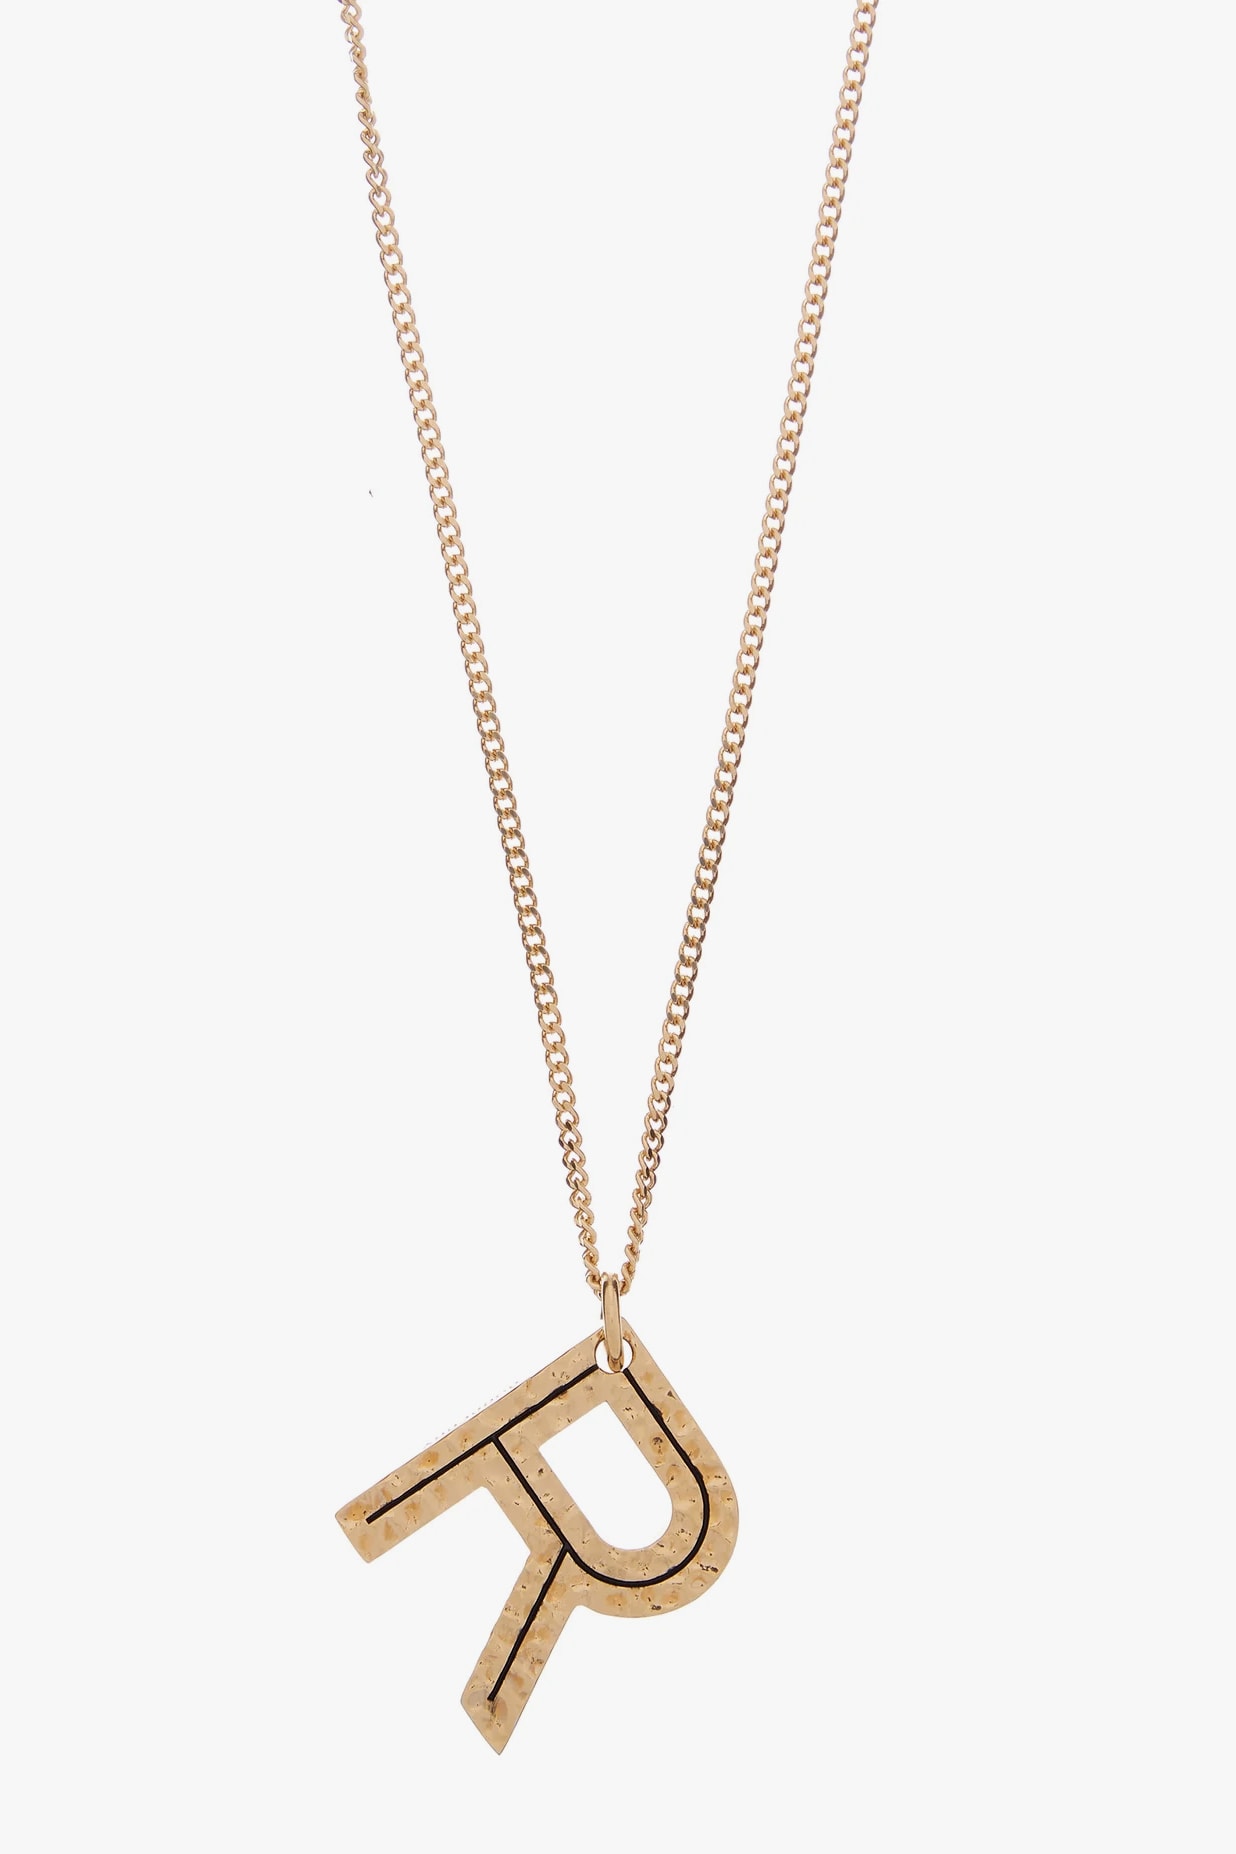 Burberry Letter Pendant Necklaces Gold Jewelry Collection Luxury Chain